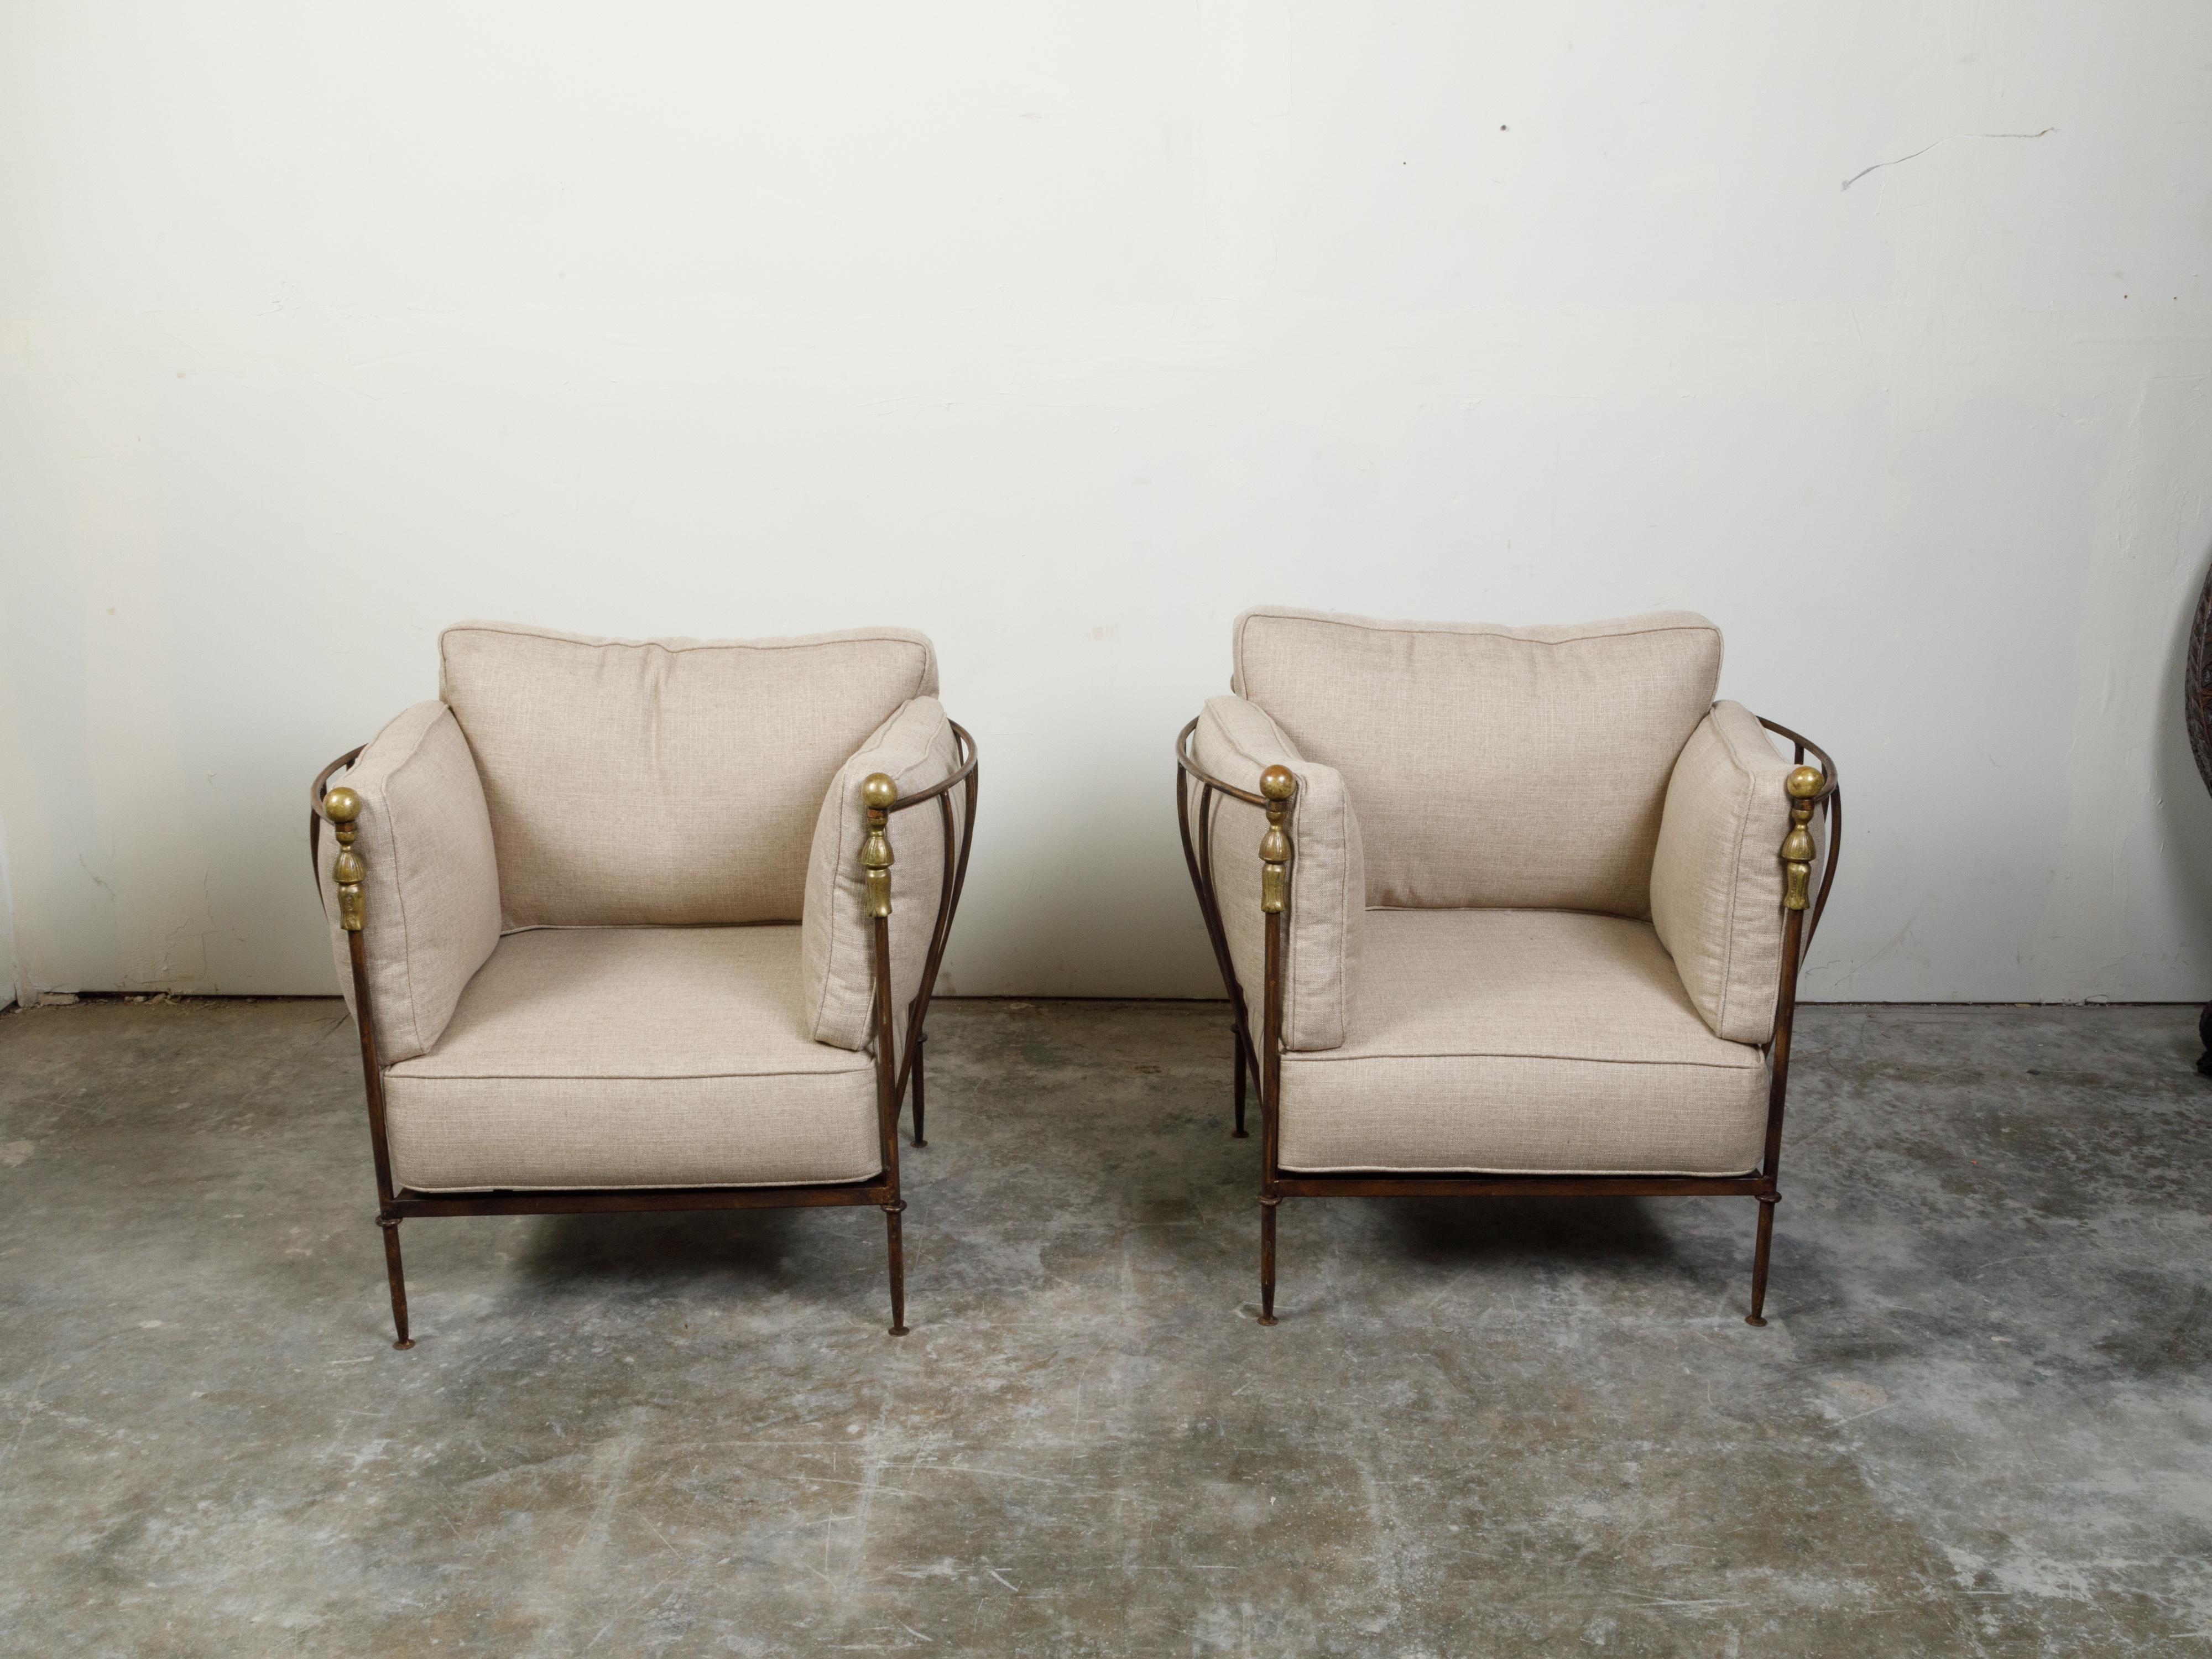 A pair of iron and brass club chairs from the mid 20th century possibly by Michael Taylor, with linen upholstery. Created during the midcentury period, each of this pair of club chairs features an iron structure with curving arm supports, accented